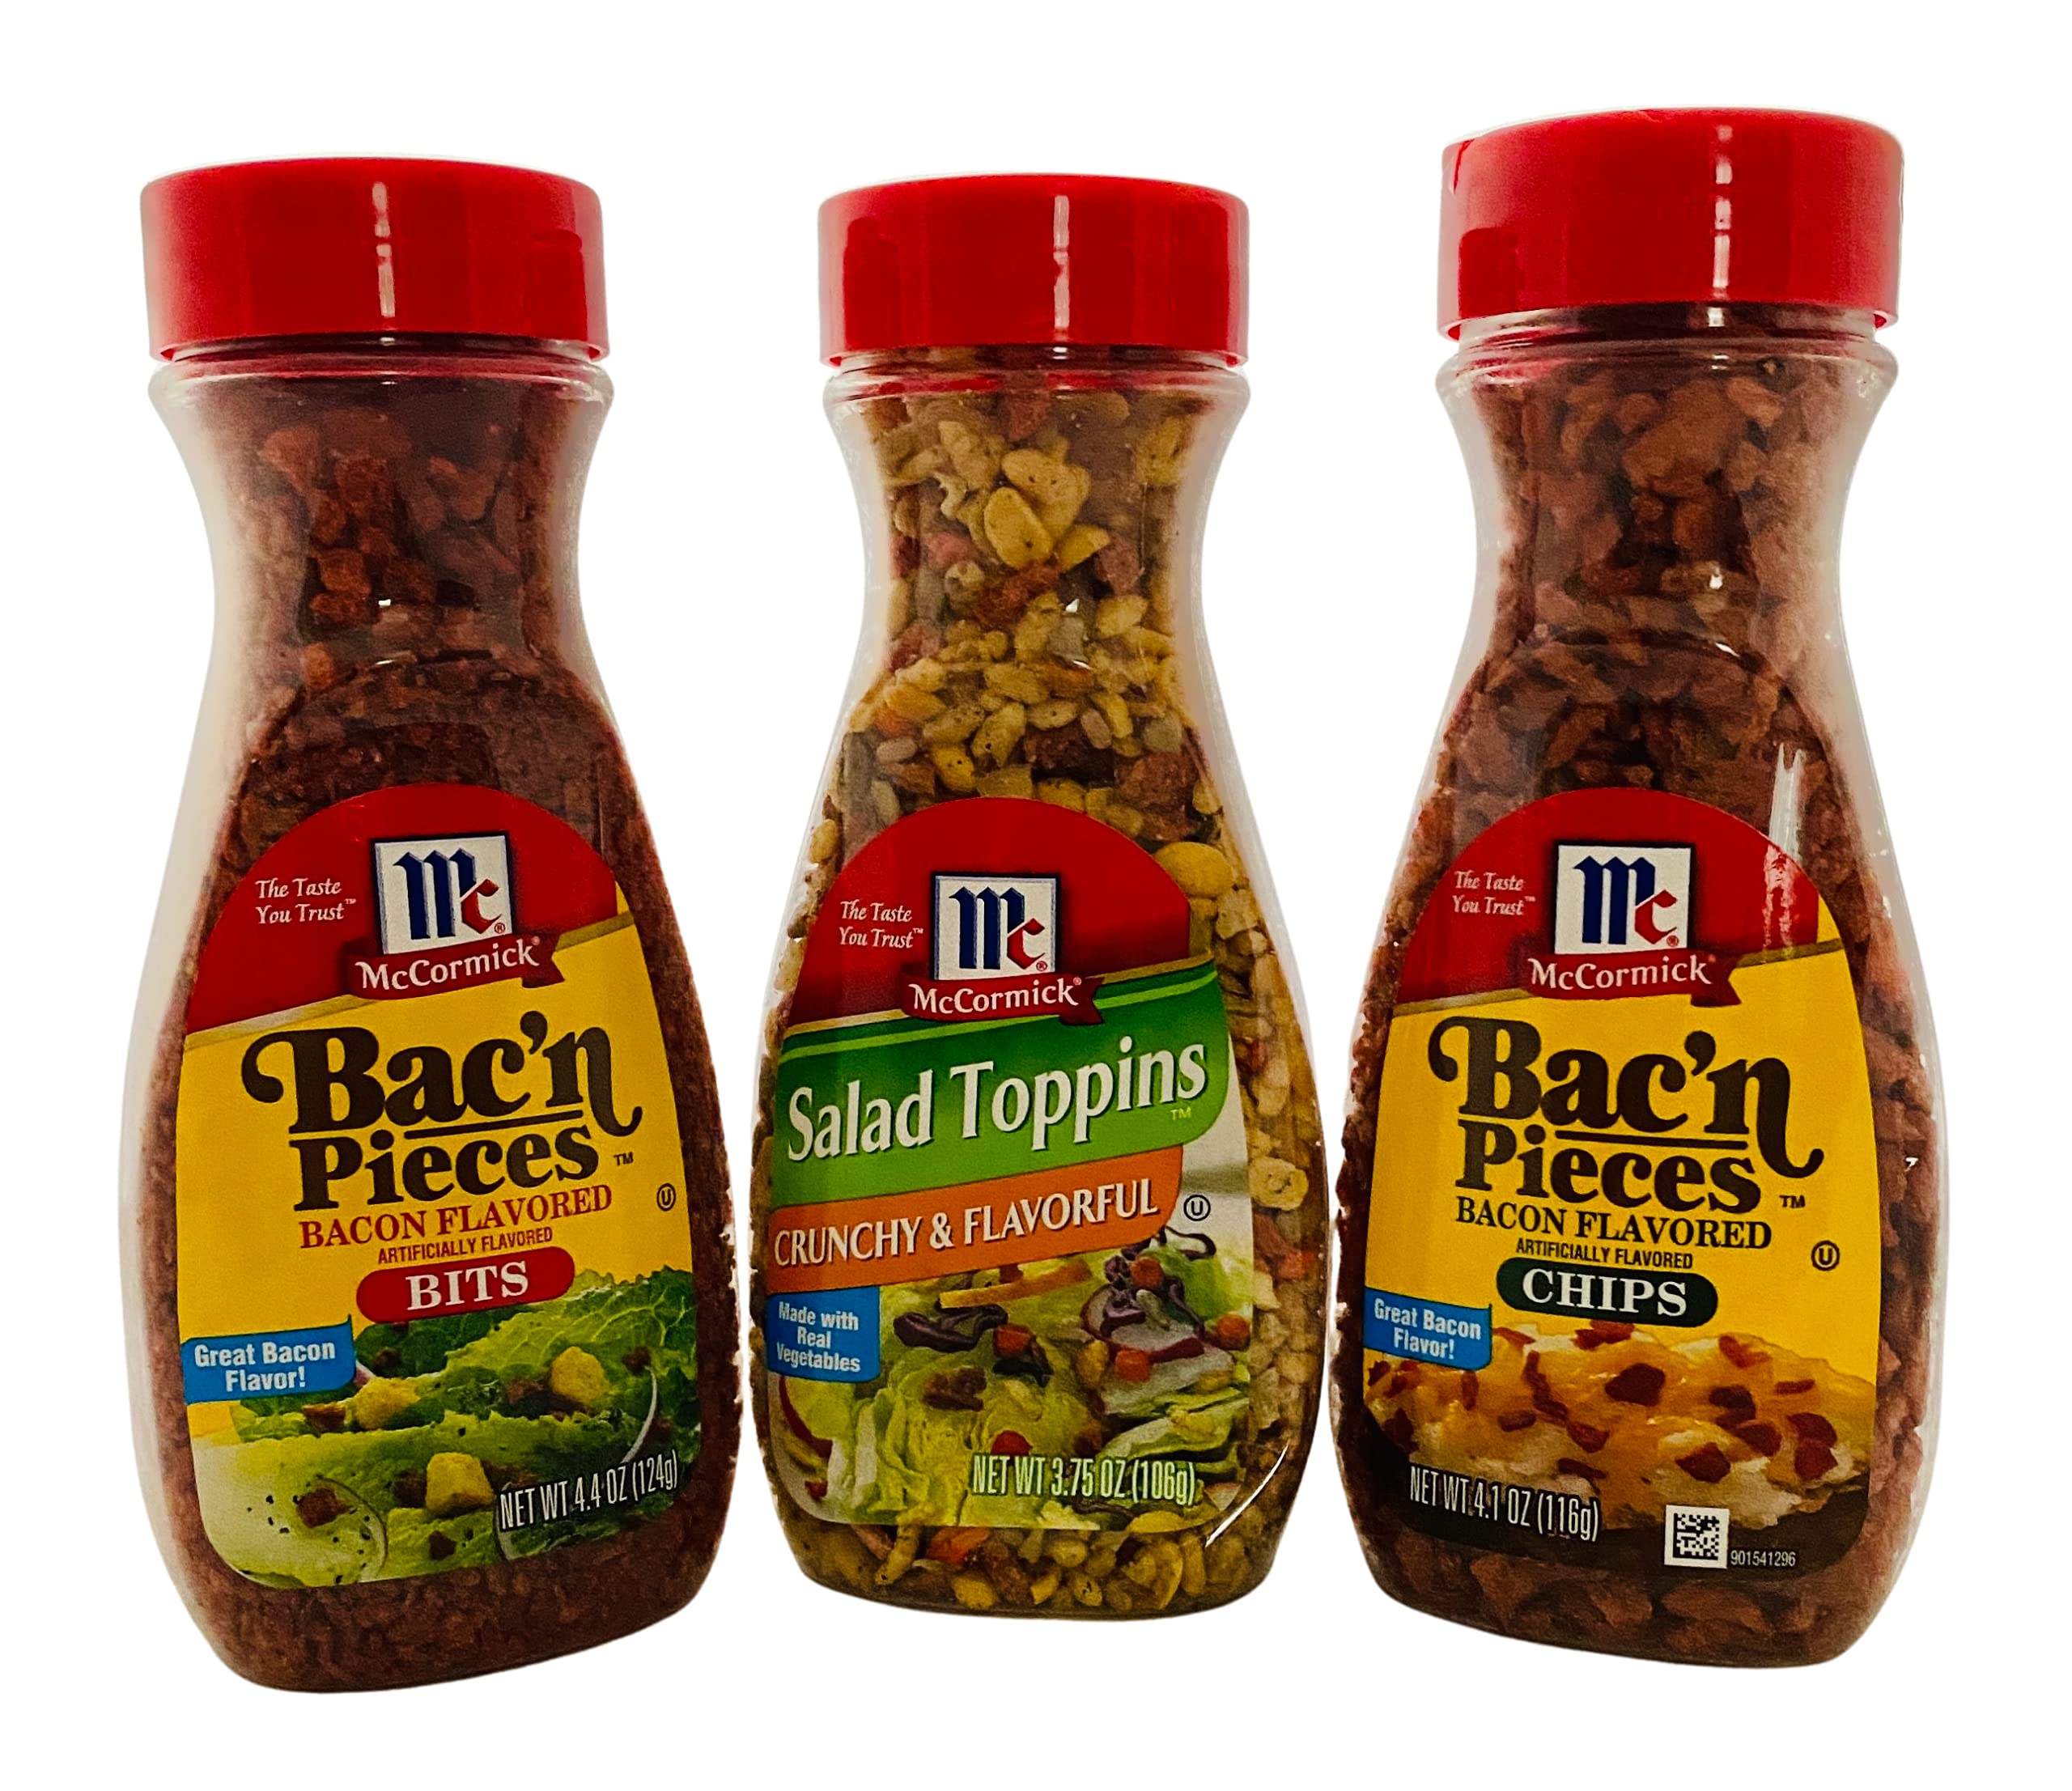 McCormick Salad Toppins Crunchy & Flavorful Salad Topping - 3.75 Oz - Pack  of 3